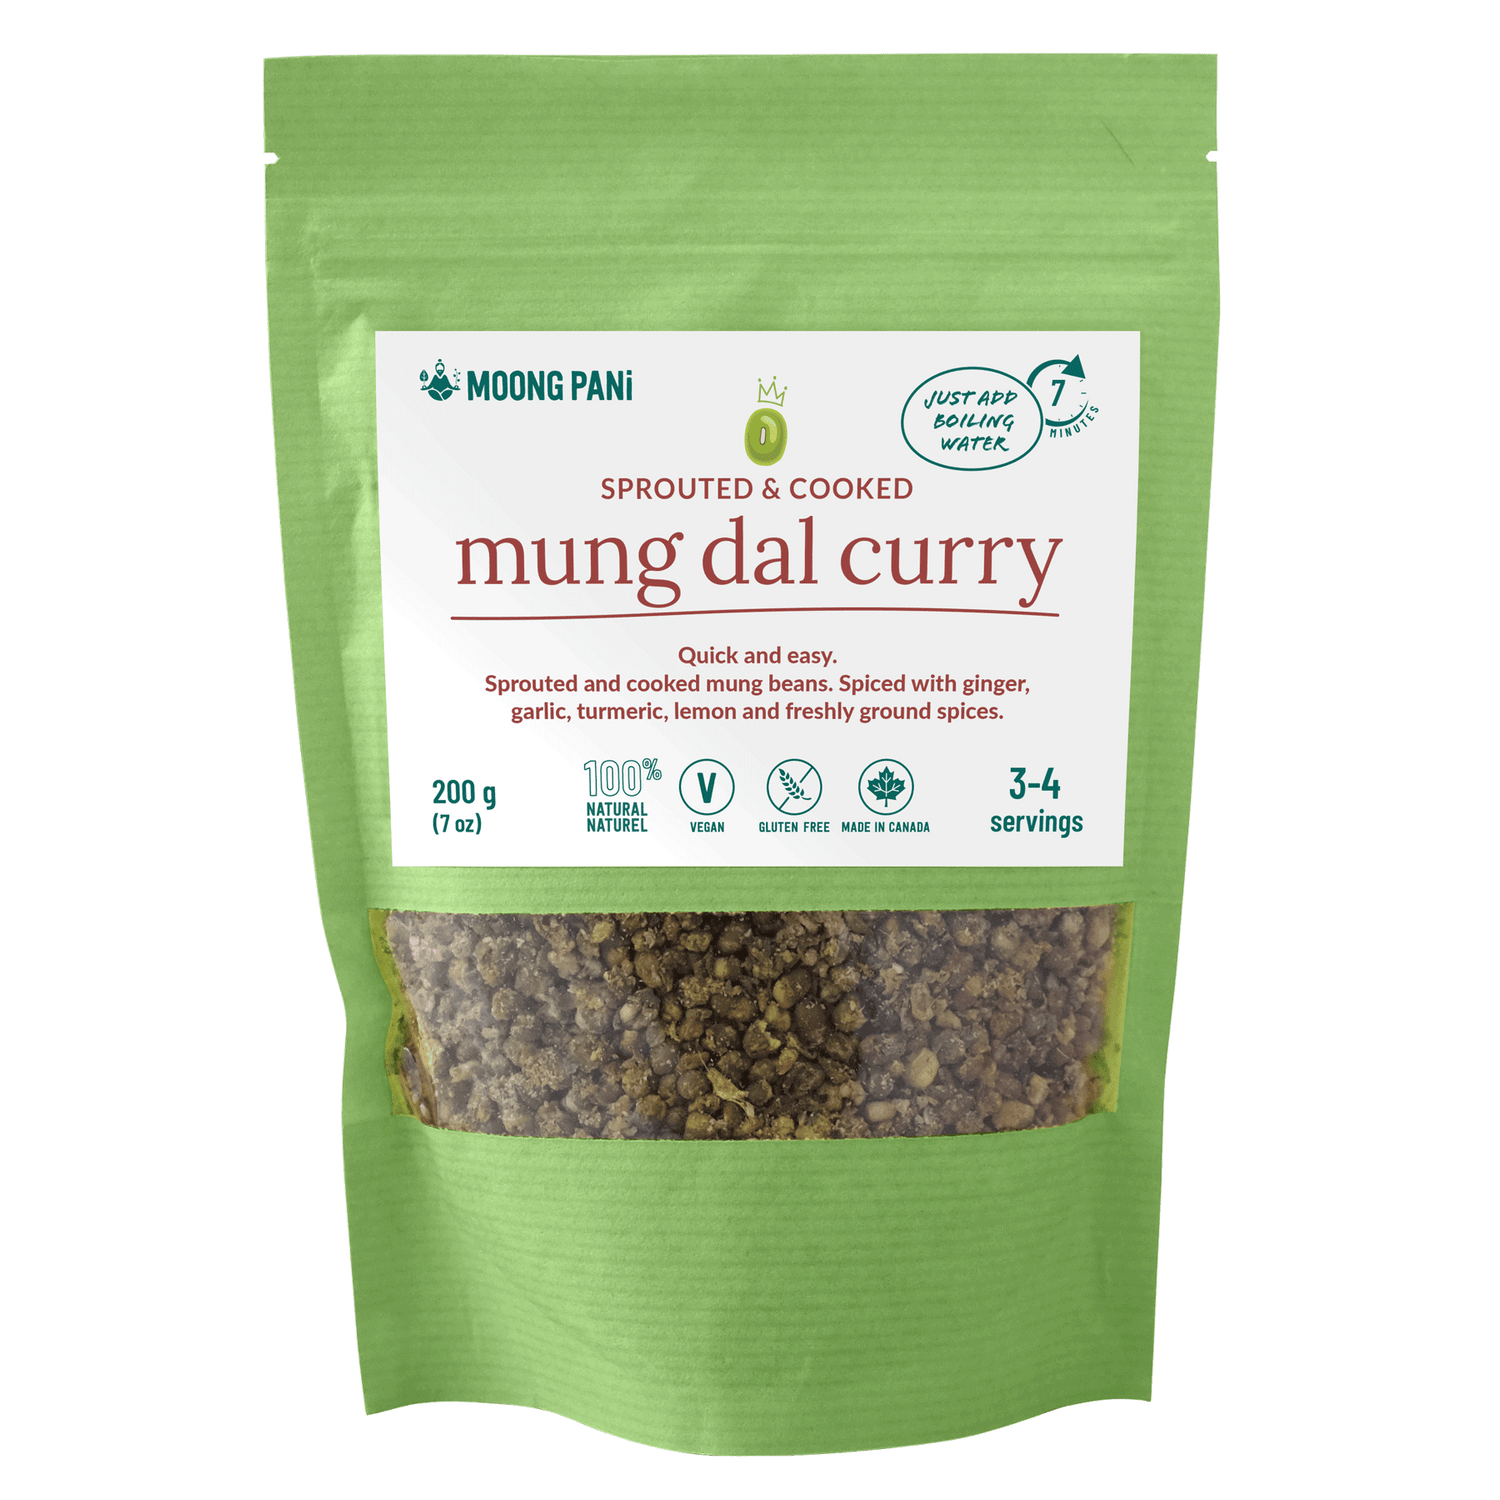 Sprouted Mung Dal Curry: 3-4 servings